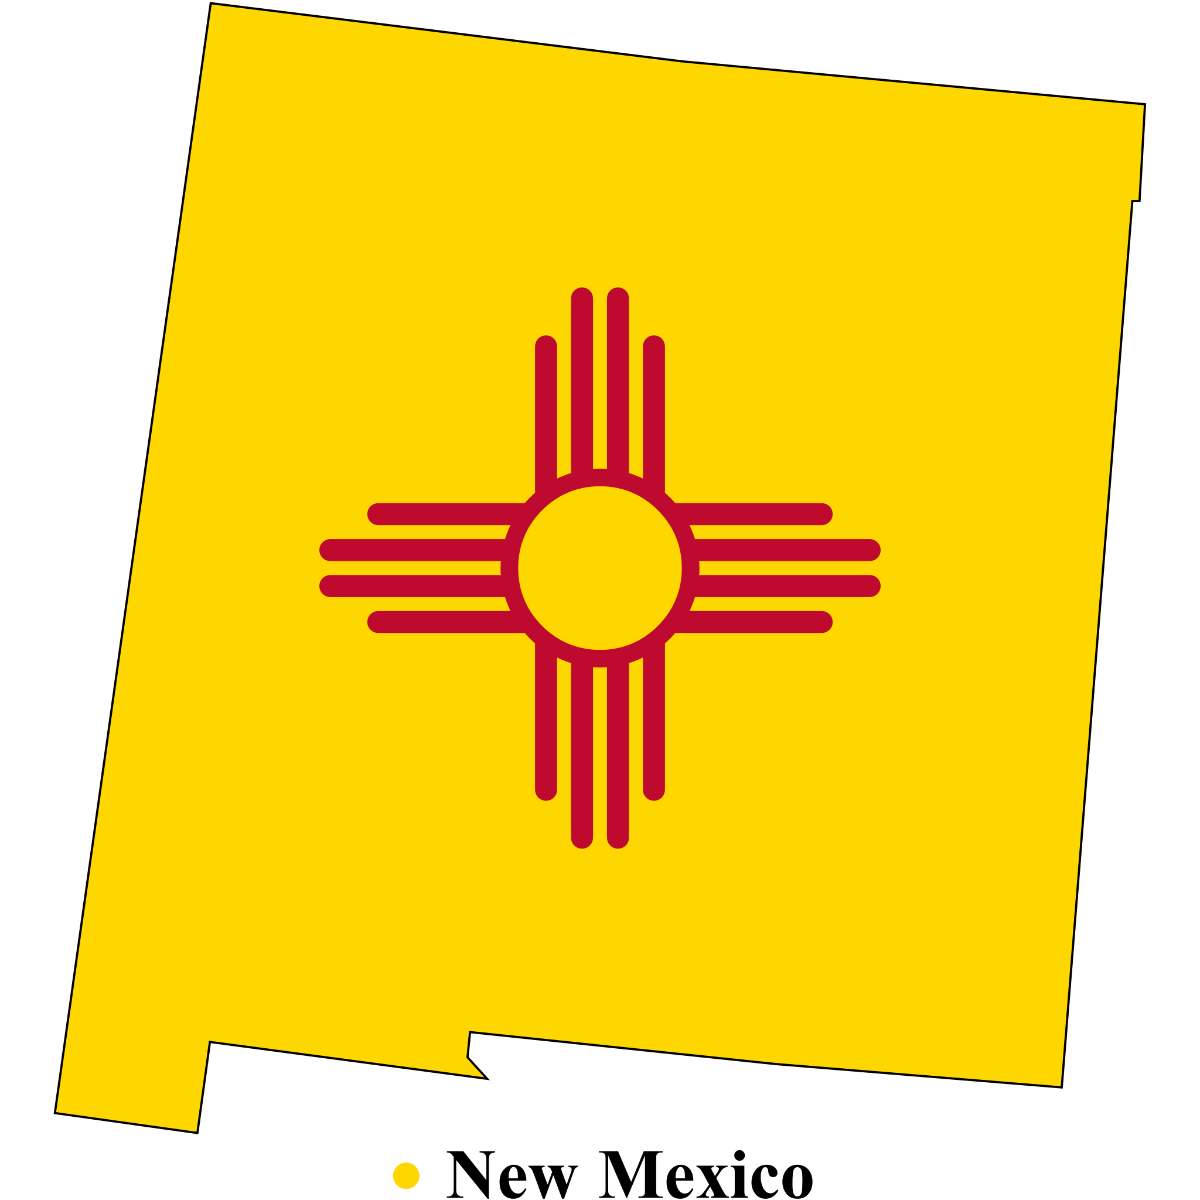 New Mexico State map cutout with New Mexico flag superimposed